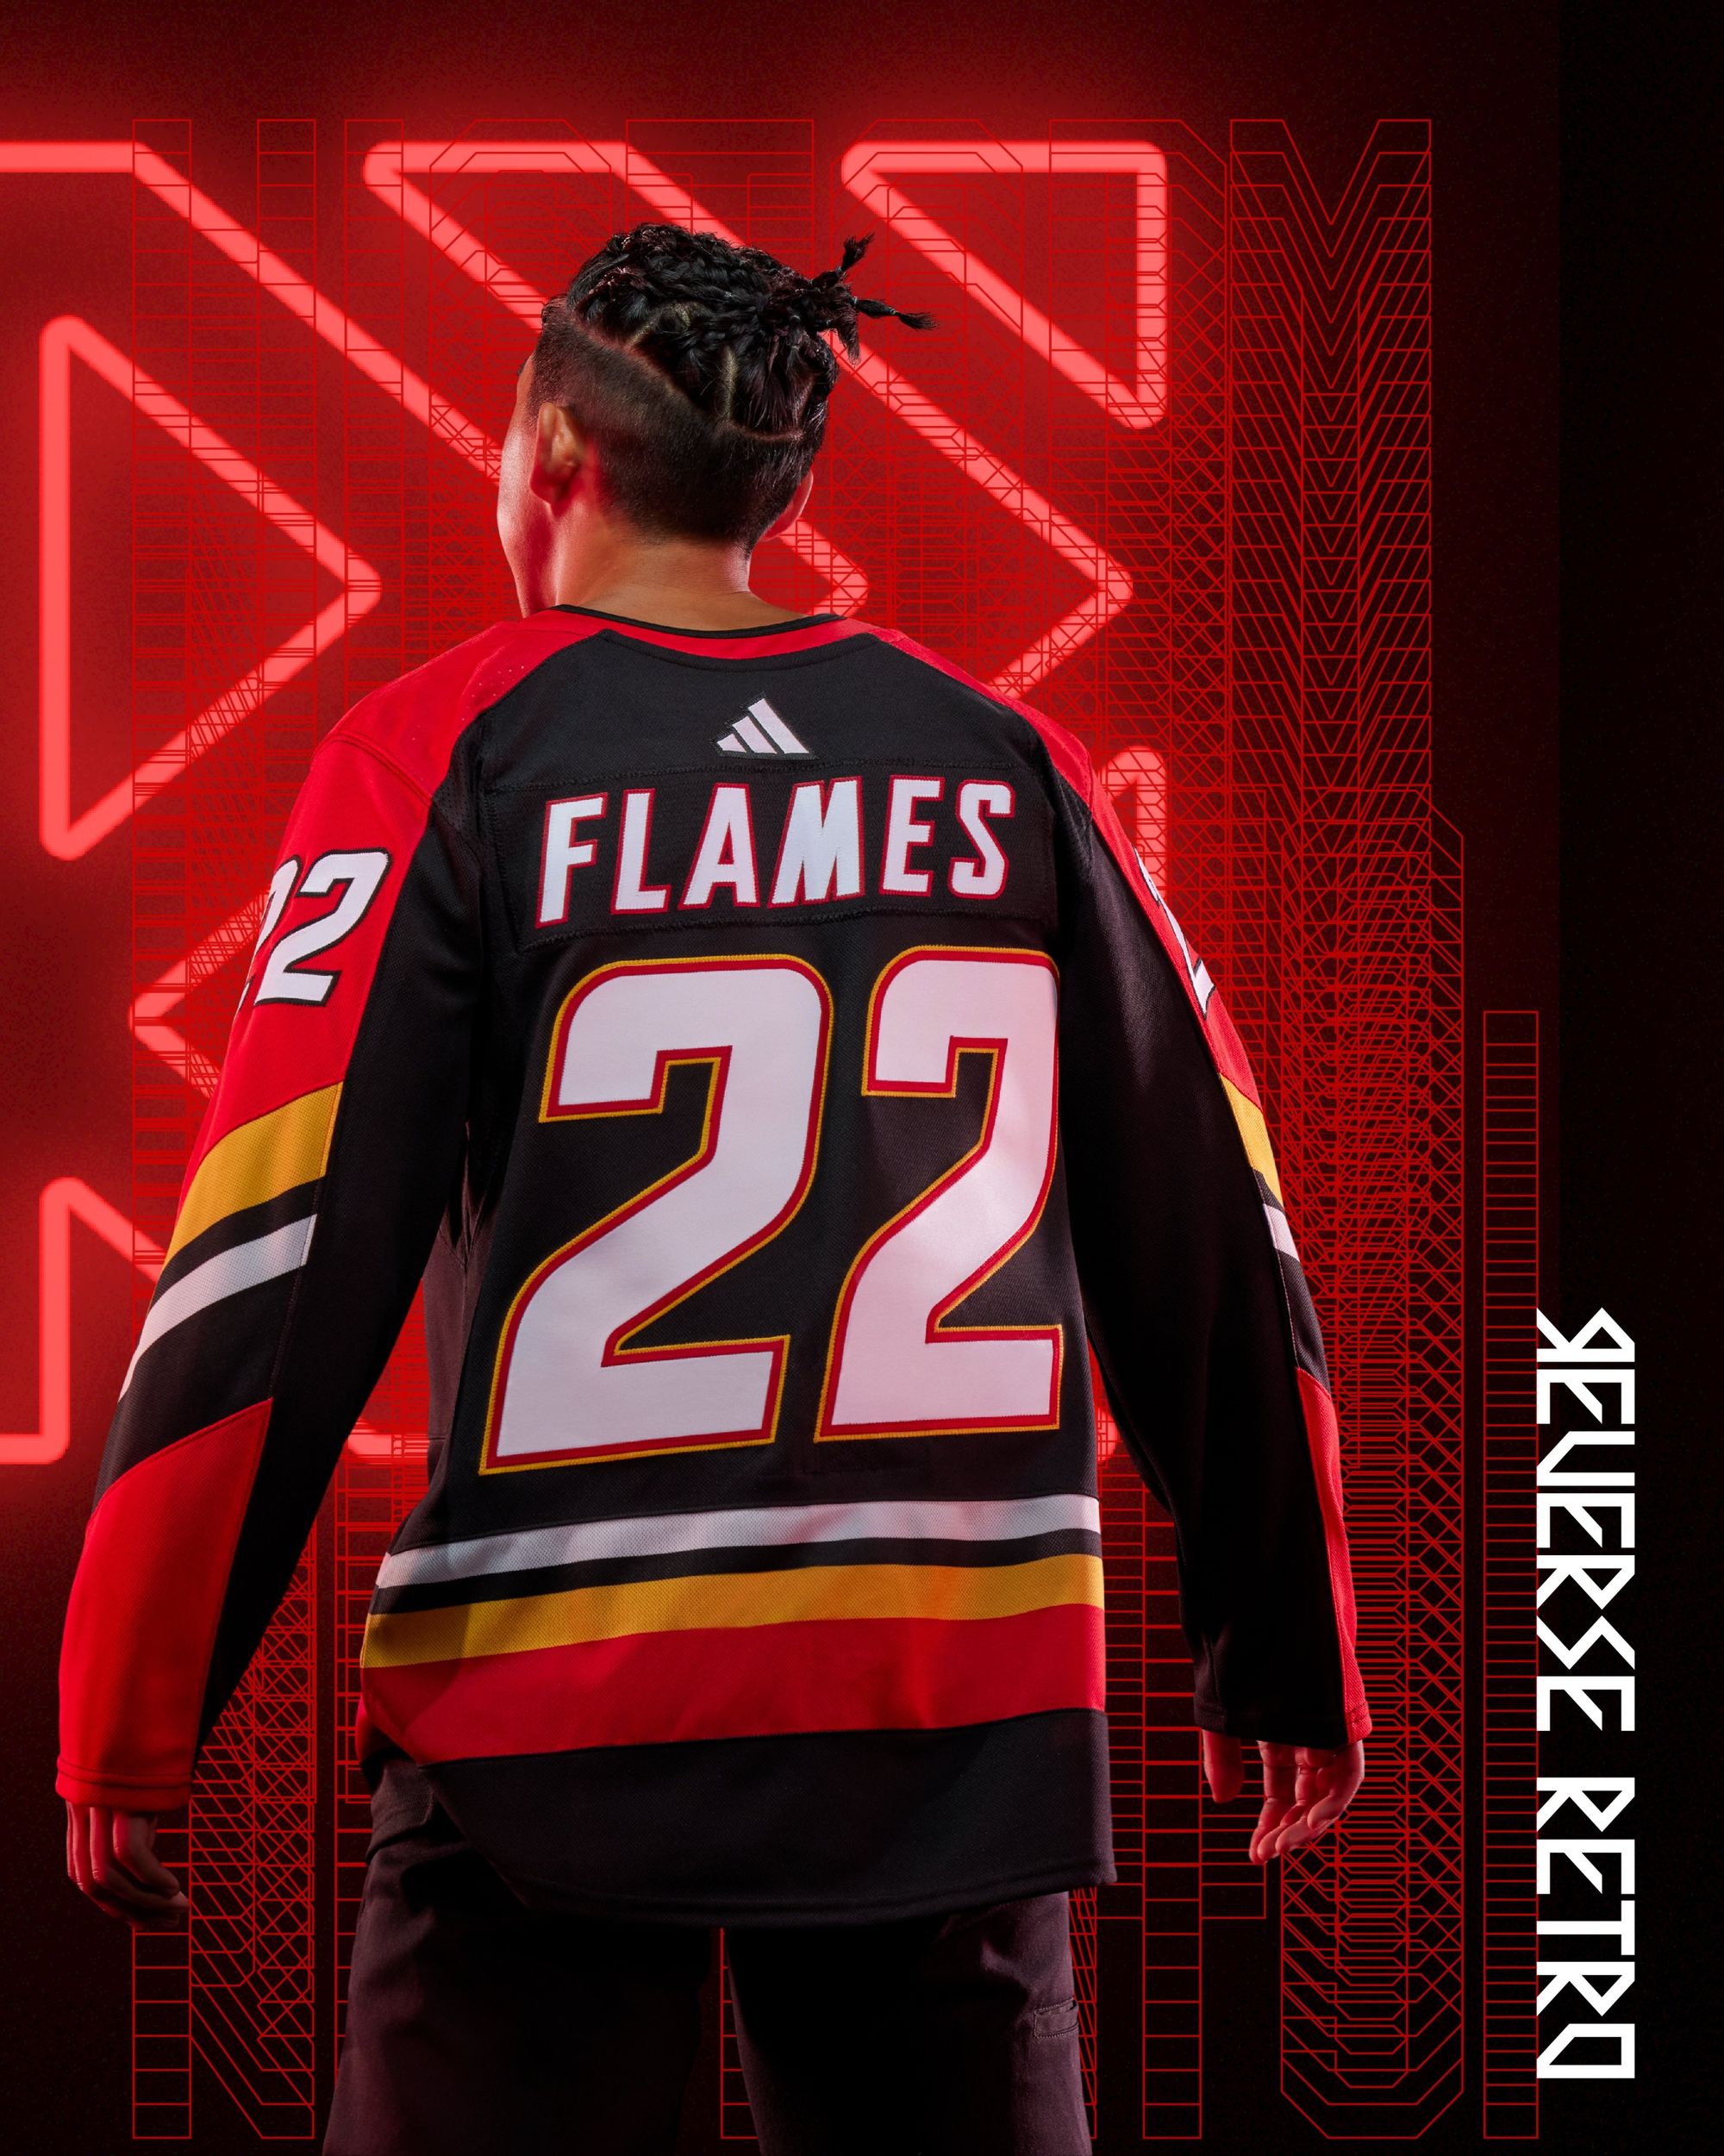 What are your thoughts on the Reverse Retro jerseys after seeing